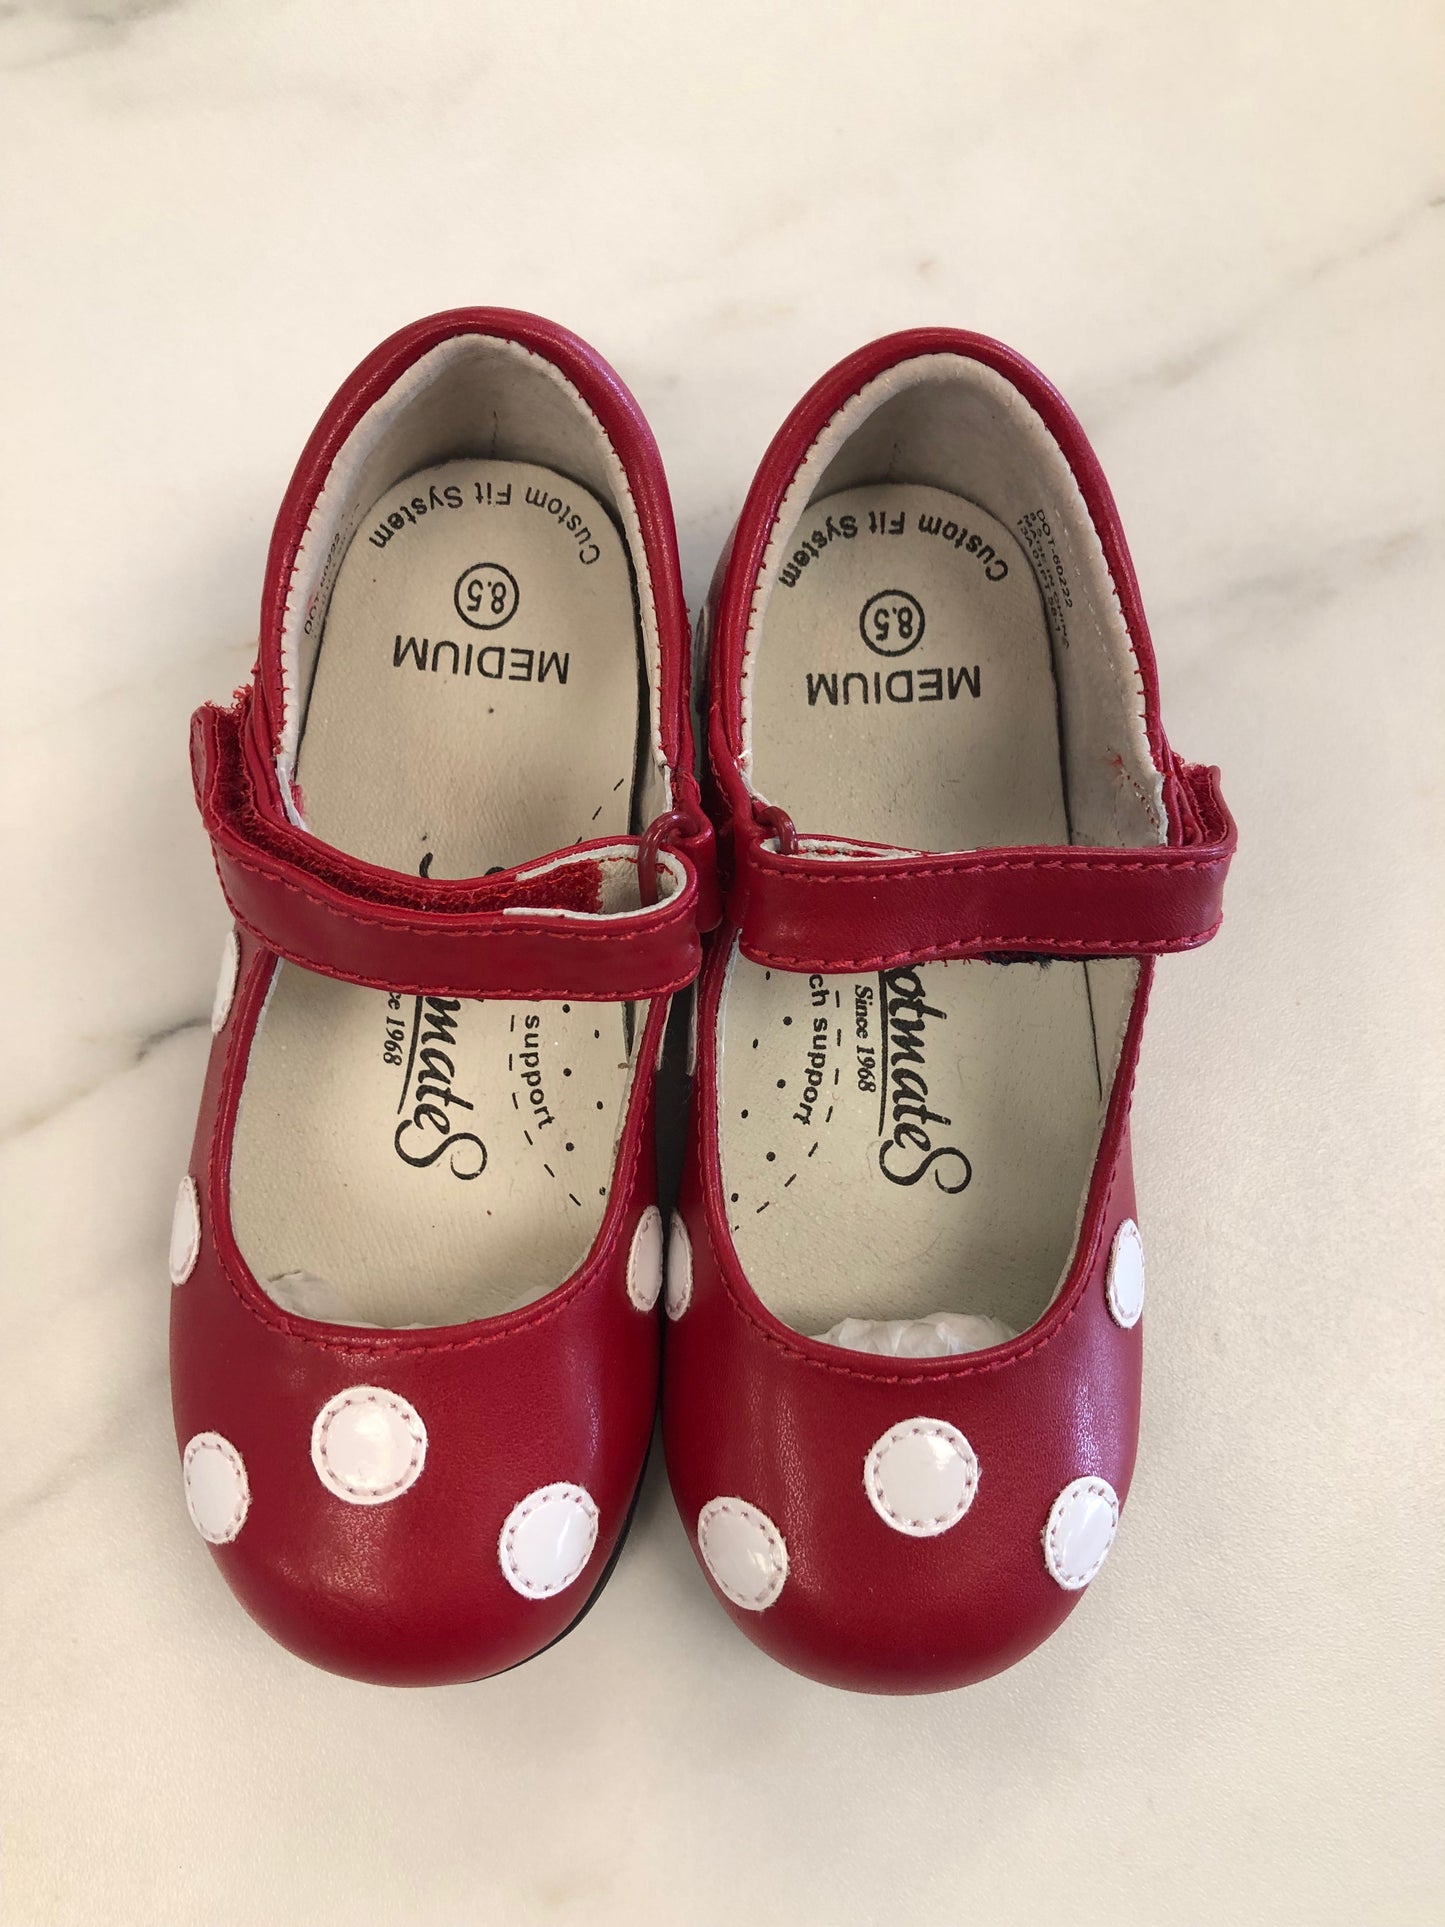 Footmates Child Size 8.5 Red Polka Dot Shoes/Boots